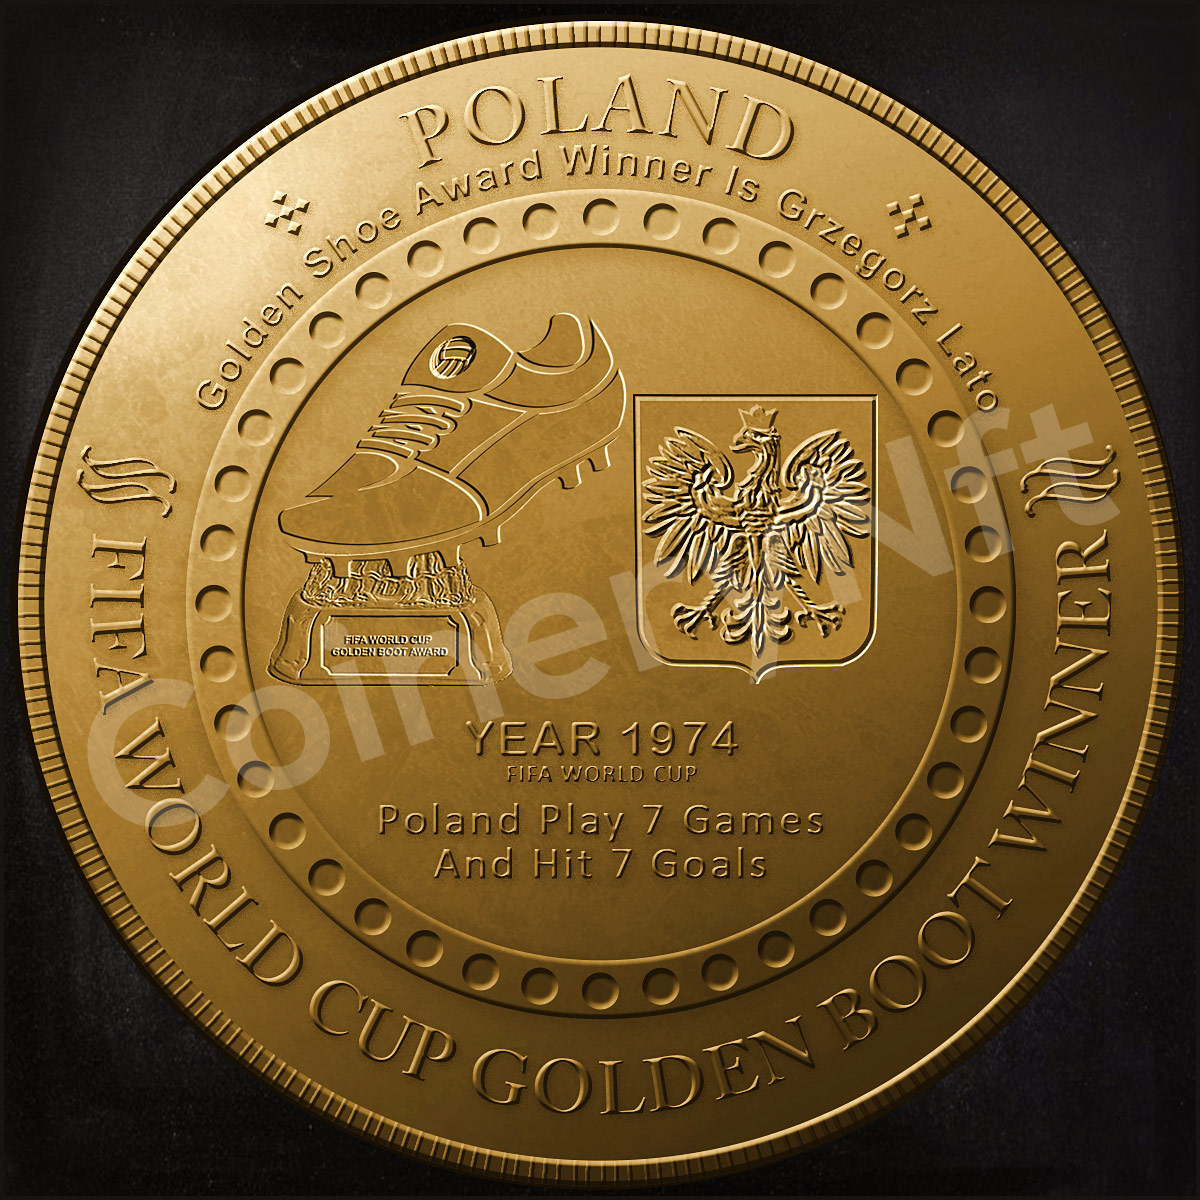 FIFA World Cup Golden Boot Winner 1974, was won by Grzegorz Lato (Poland). There is an NFT coin made in memory of this event.
@opensea @FIFAWorldCup @fifamedia @FIFAcom
#nftcommunity #nftcollector #nftinvestor #nftnews #nftmagazine #nftbuyers #NFTshills #nftgame #cryptonews #NFT